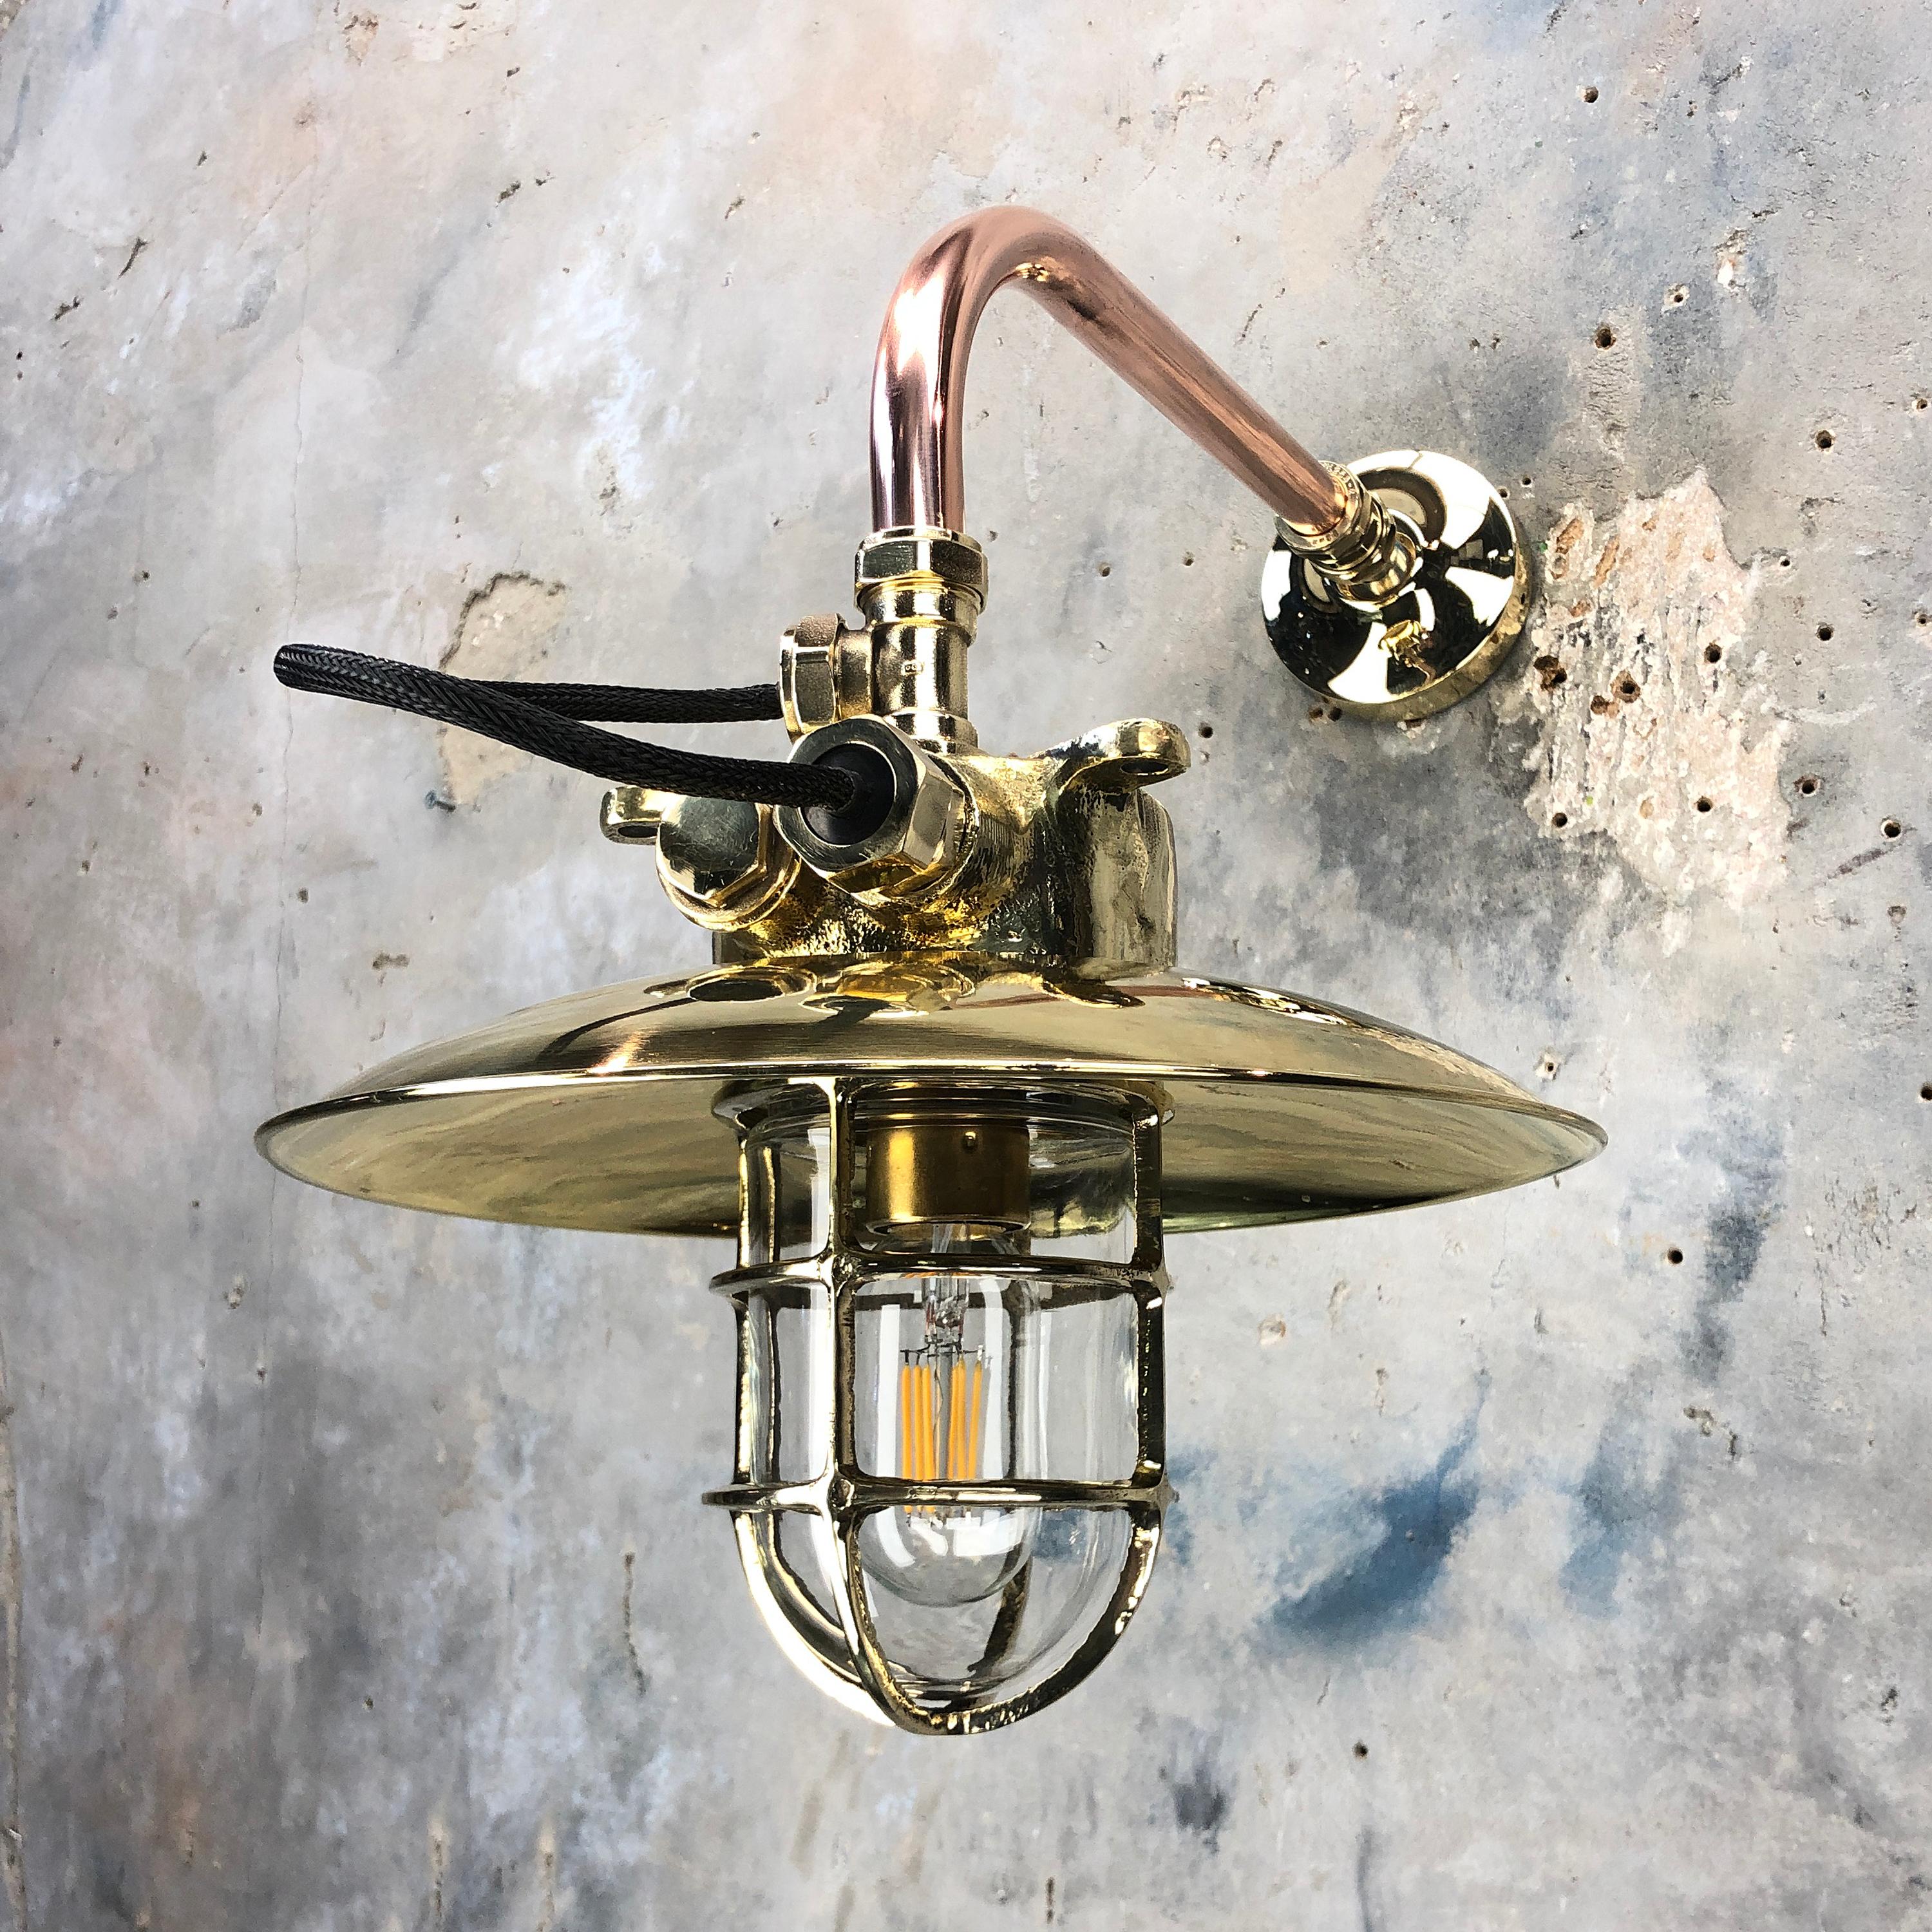 Industrial 1970s Japanese Cast Brass and Copper Explosion Proof Caged Cantilever Wall Light